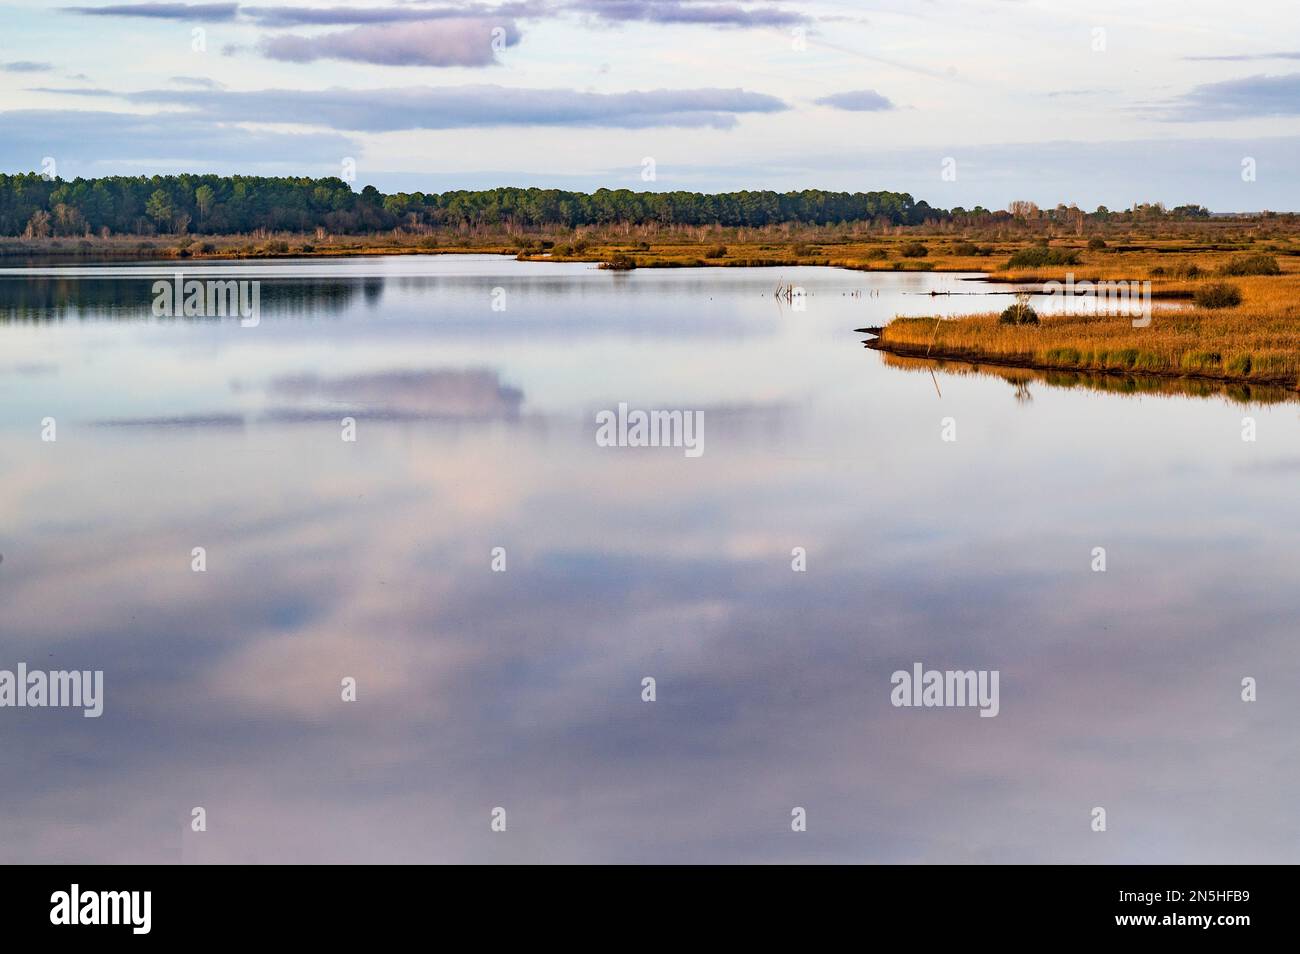 The Étang de Cousseau is a pristine nature reserve with a coastal lake, swamps, dunes, and woods in the Gironde departement, France Stock Photo